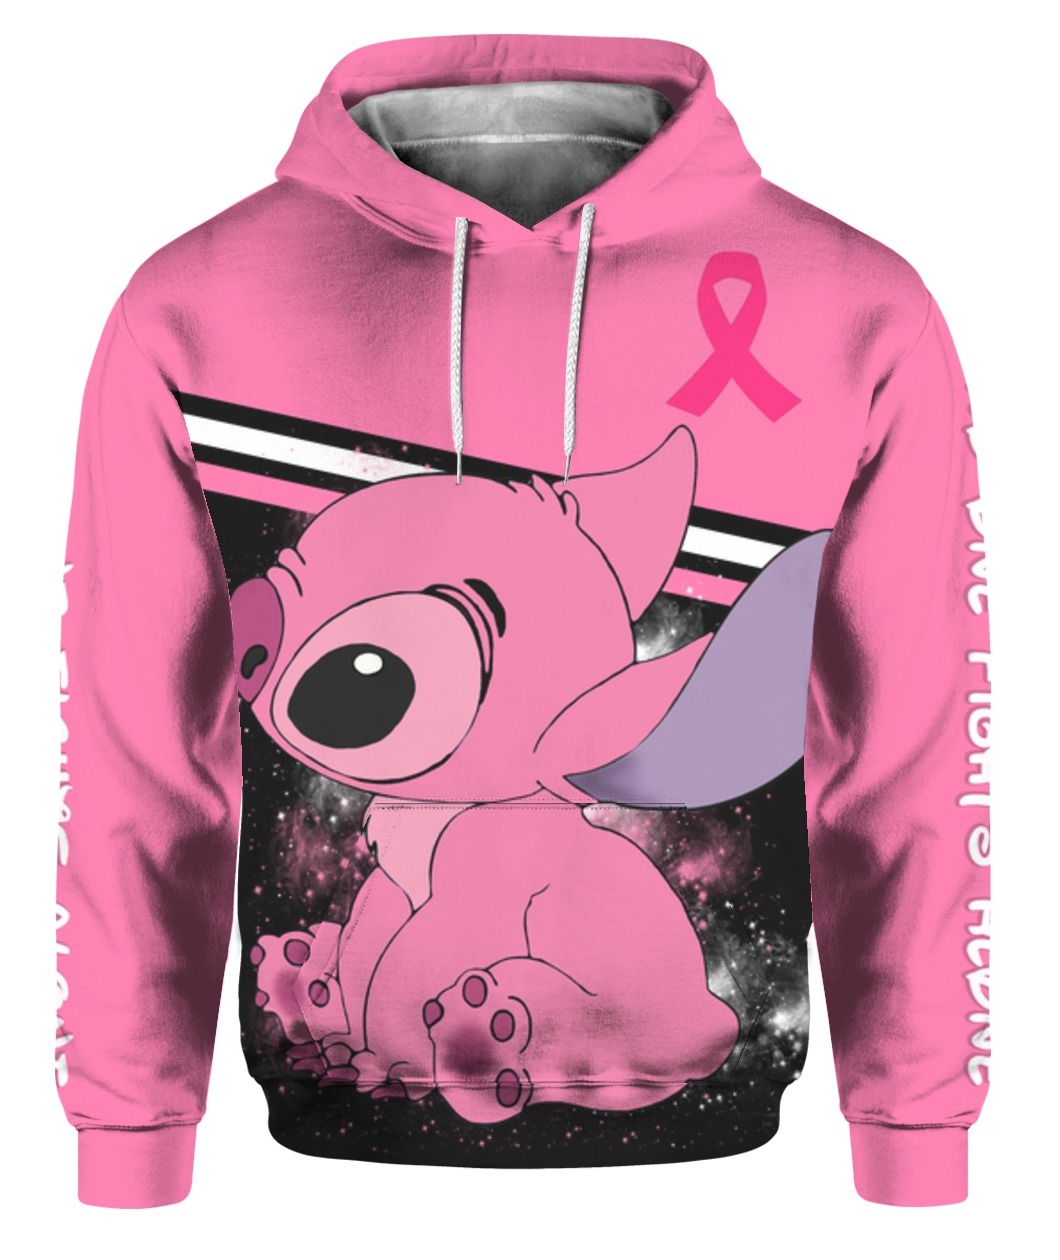 Cancer Awareness Stitch ohana means family 3d hoodie